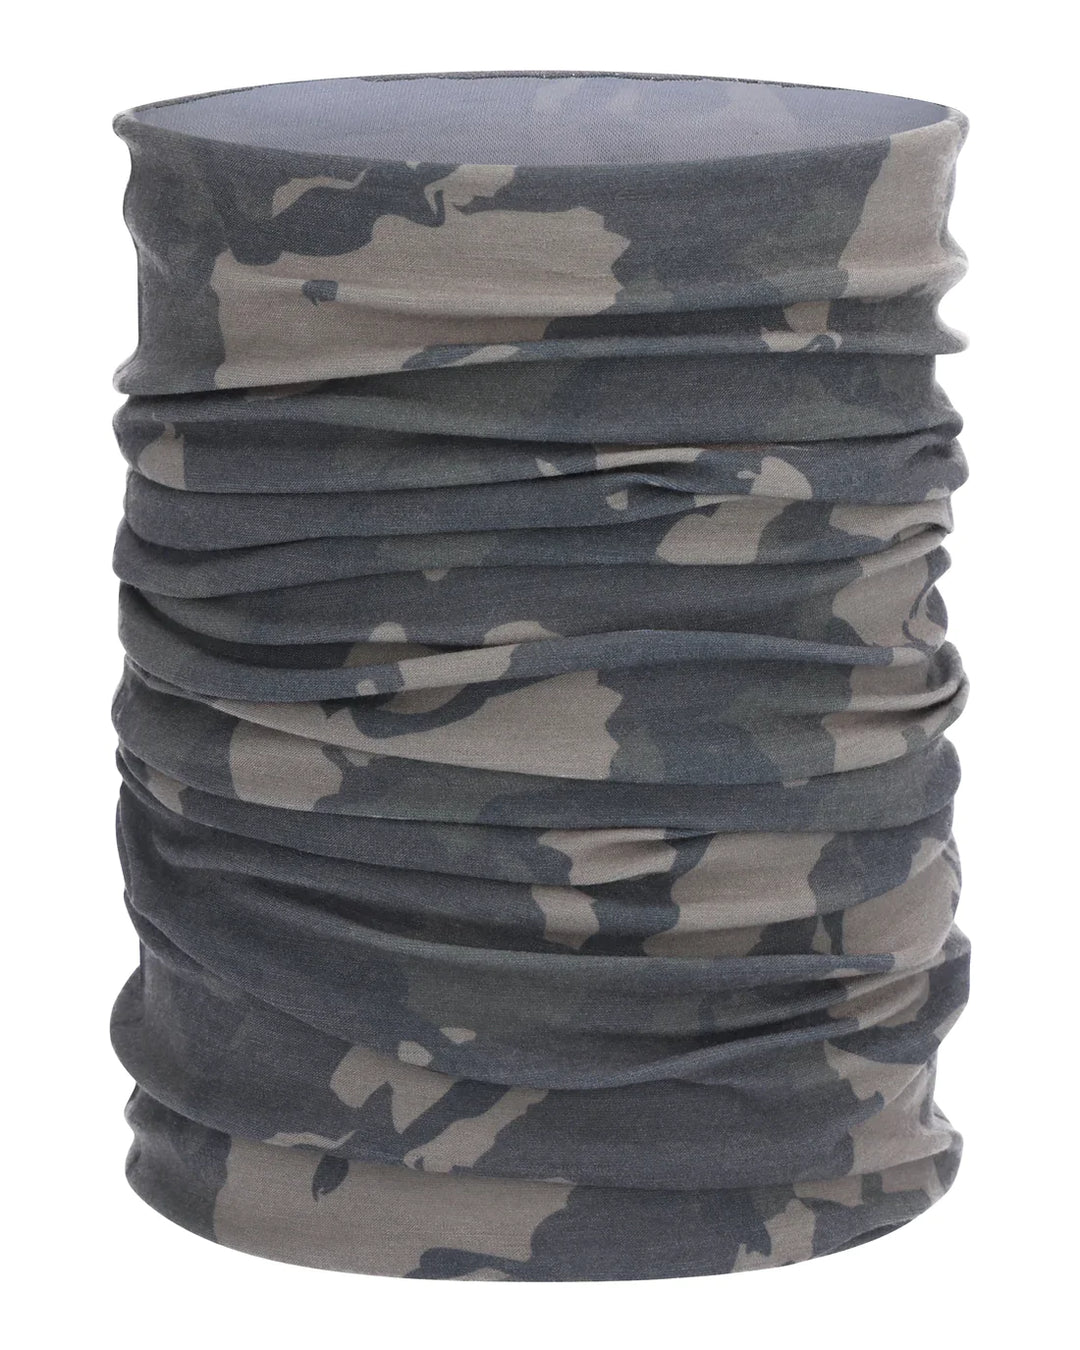 Simms -Neck Gaiter - Regiment Camo Olive Drab – Fly Fish Food